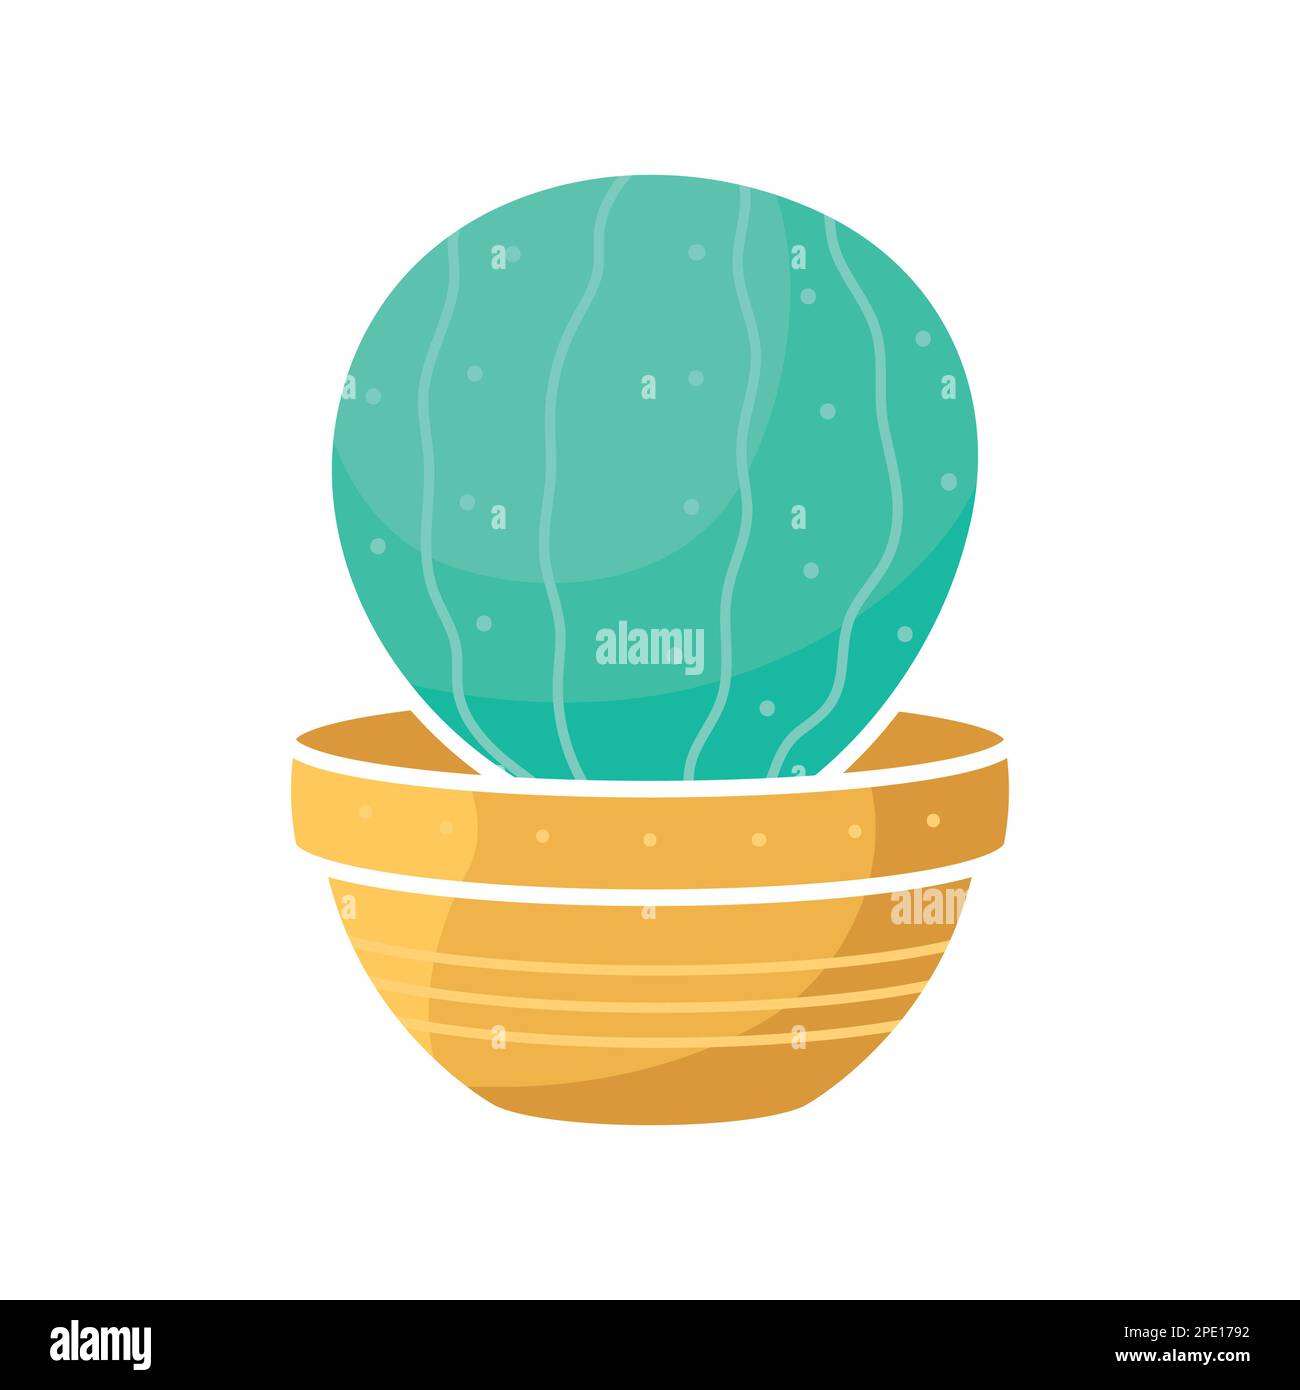 Round decorative cactus in a pot. Flat illustration of a